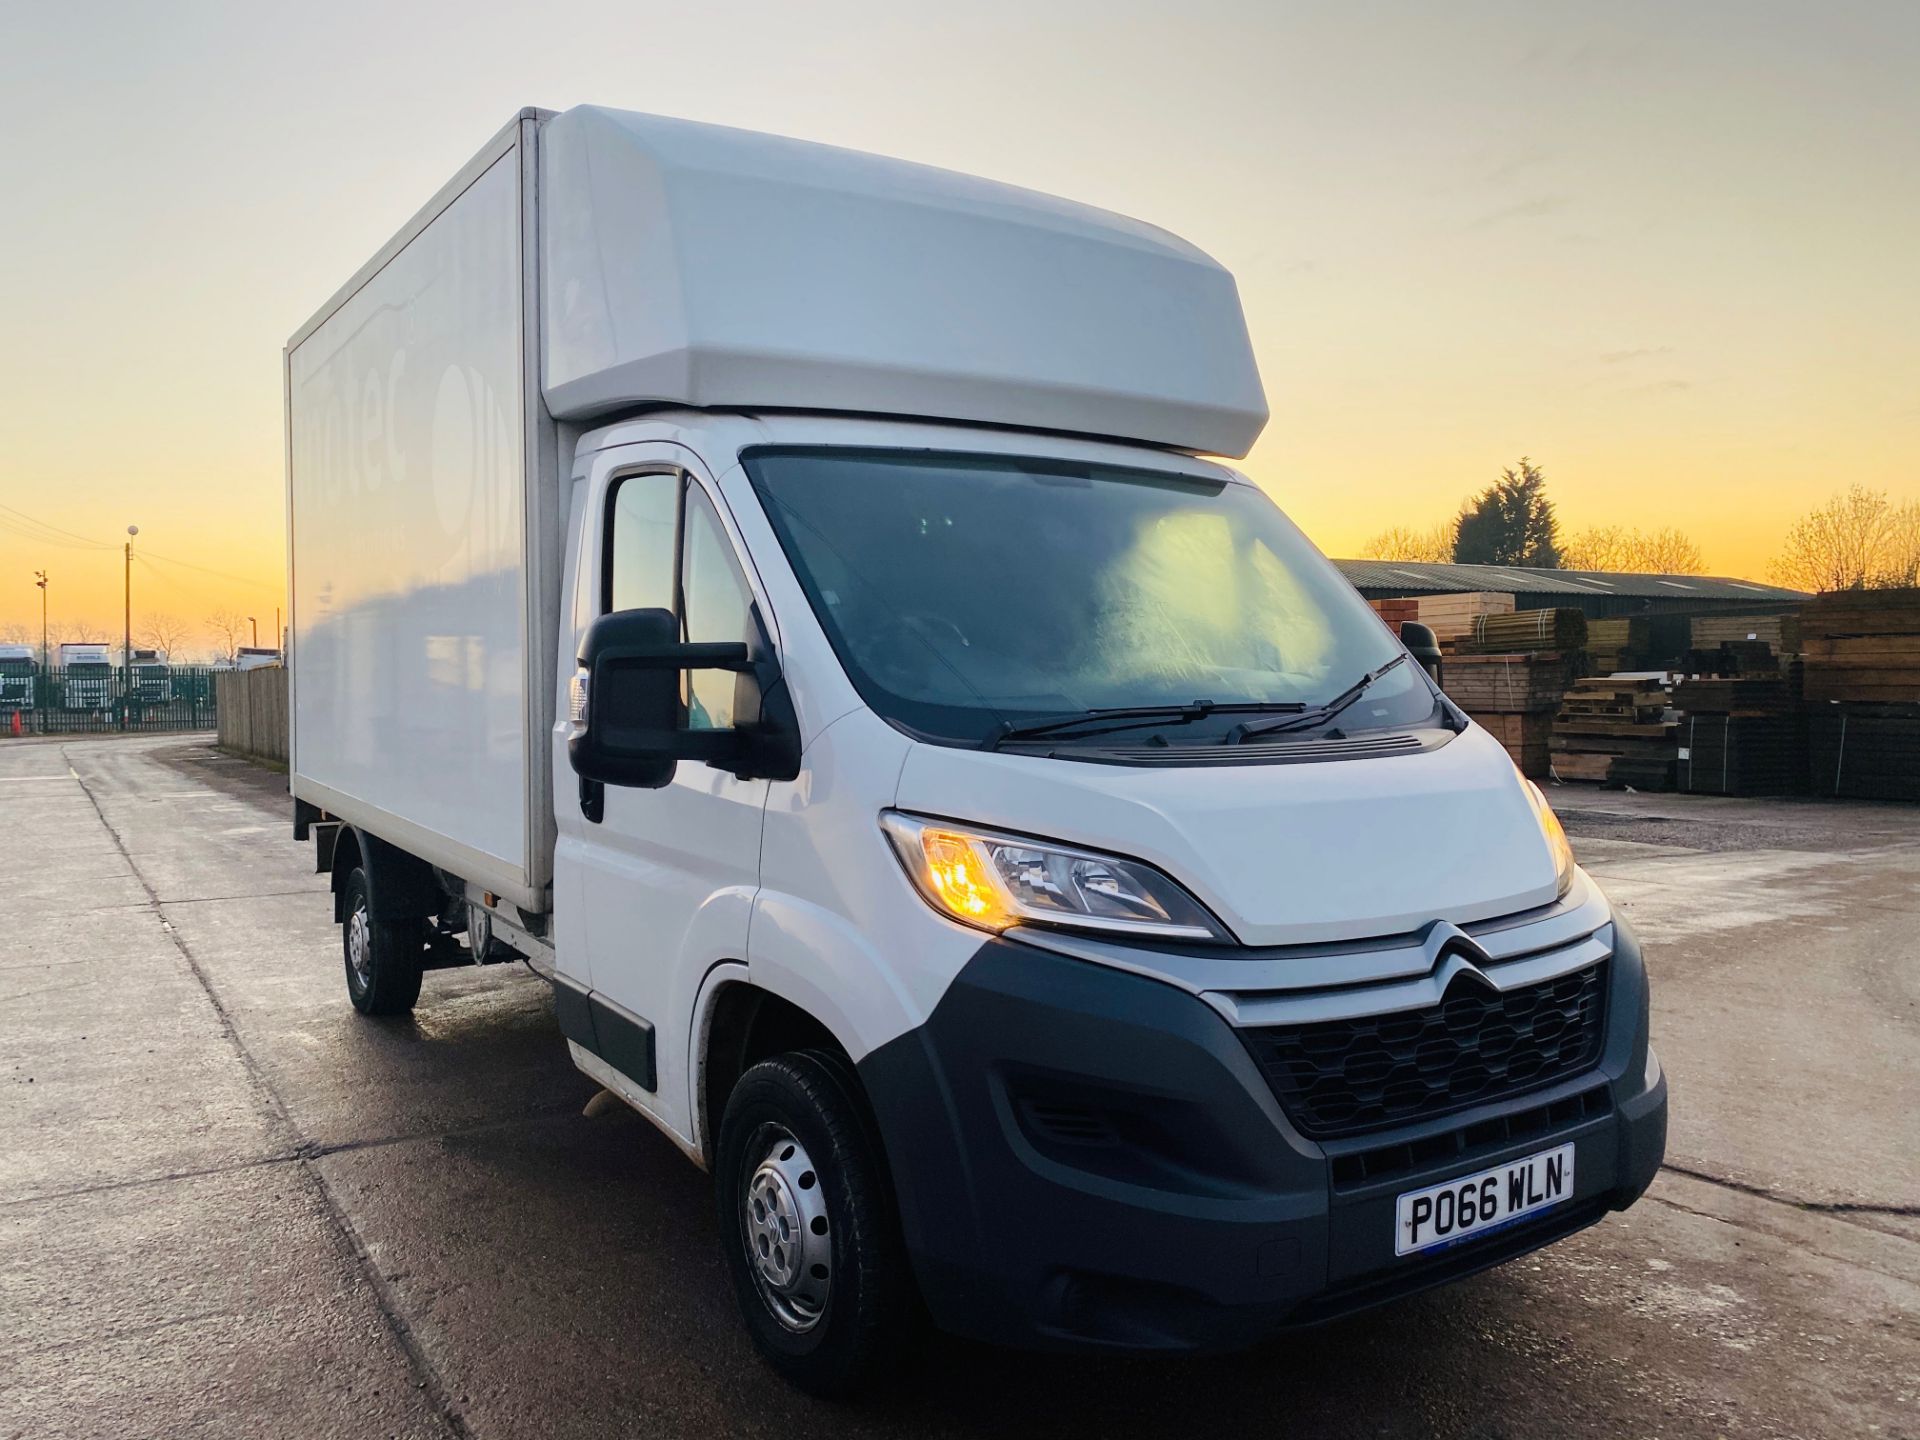 CITROEN RELAY 2.2HDI "LWB" LUTON BOX VAN WITH ELECTRIC TAIL LIFT - 2017 MODEL - EURO 6 - 1 KEEPER - Image 2 of 17